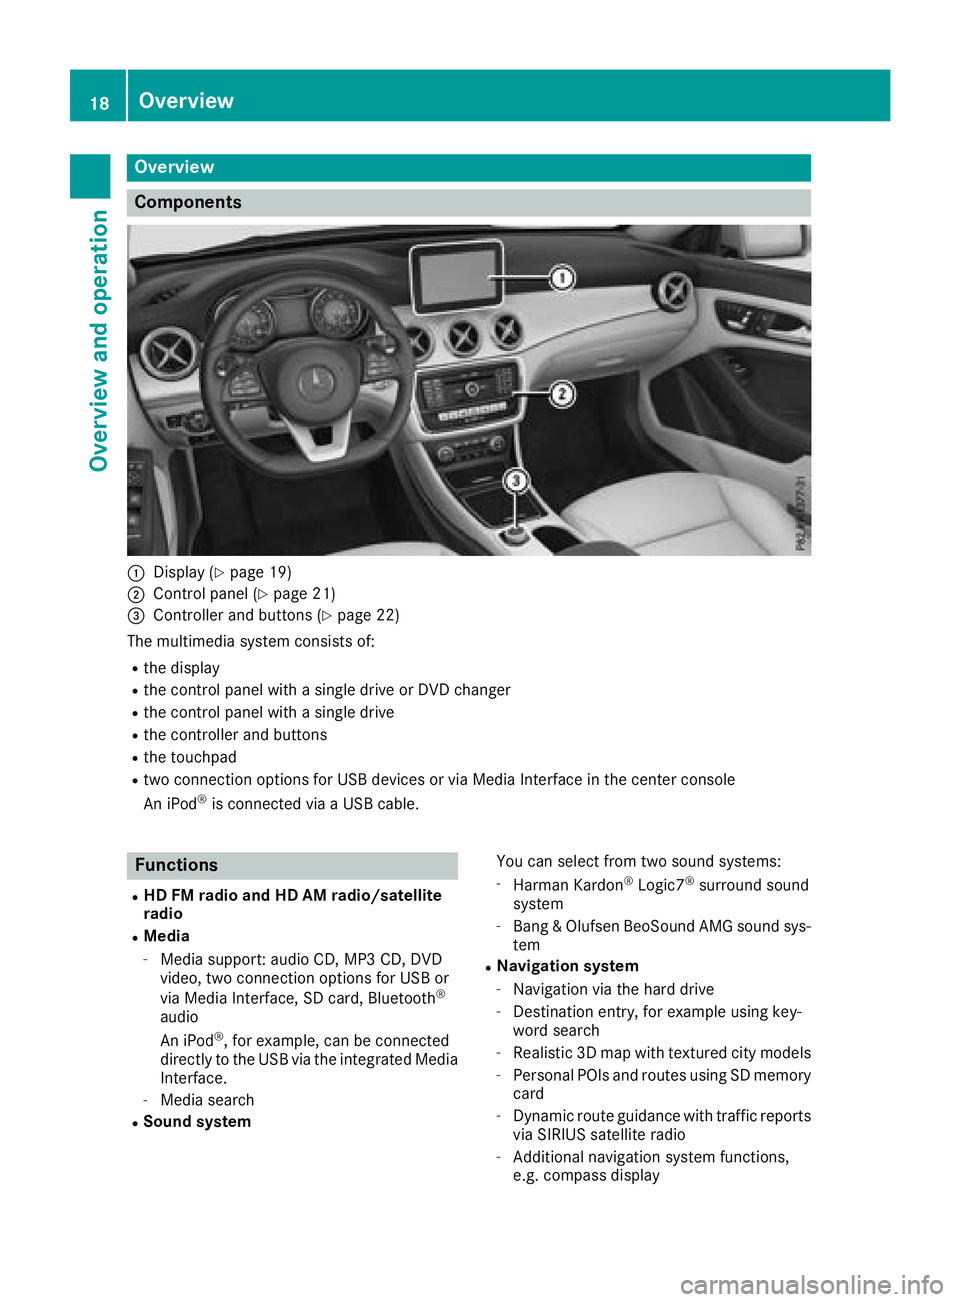 MERCEDES-BENZ GLE SUV 2018  COMAND Manual Overview
Components
:Display (Ypage 19)
;Control panel (Ypage 21)
=Controller and buttons (Ypage 22)
The multimedia system consists of:
Rthe display
Rthe control panel with a single drive or DVD chang